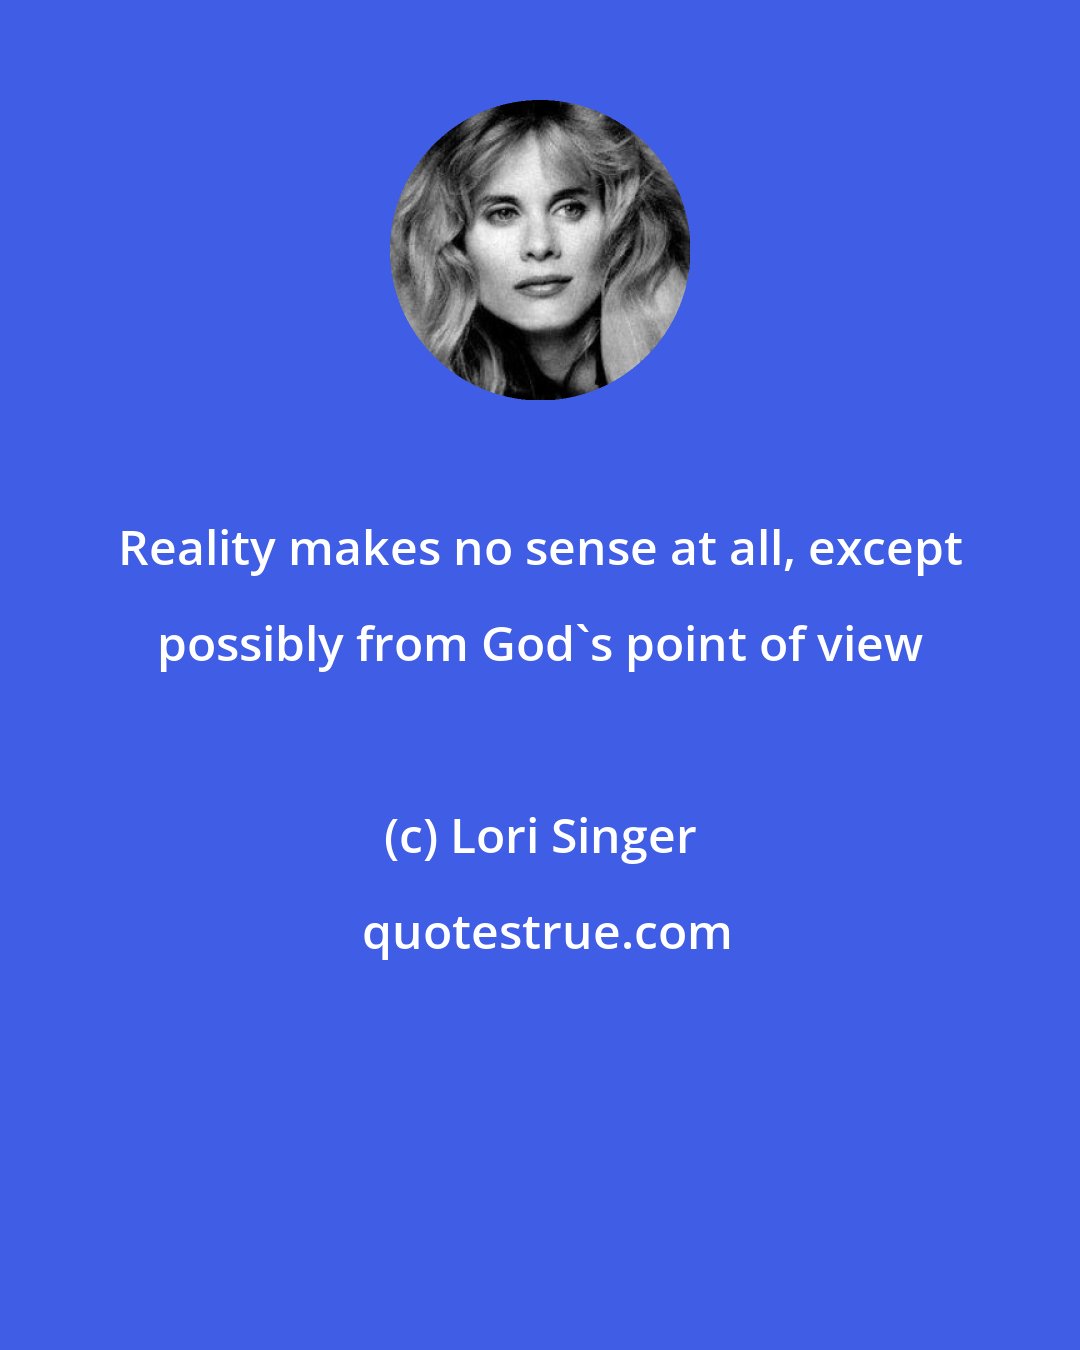 Lori Singer: Reality makes no sense at all, except possibly from God's point of view